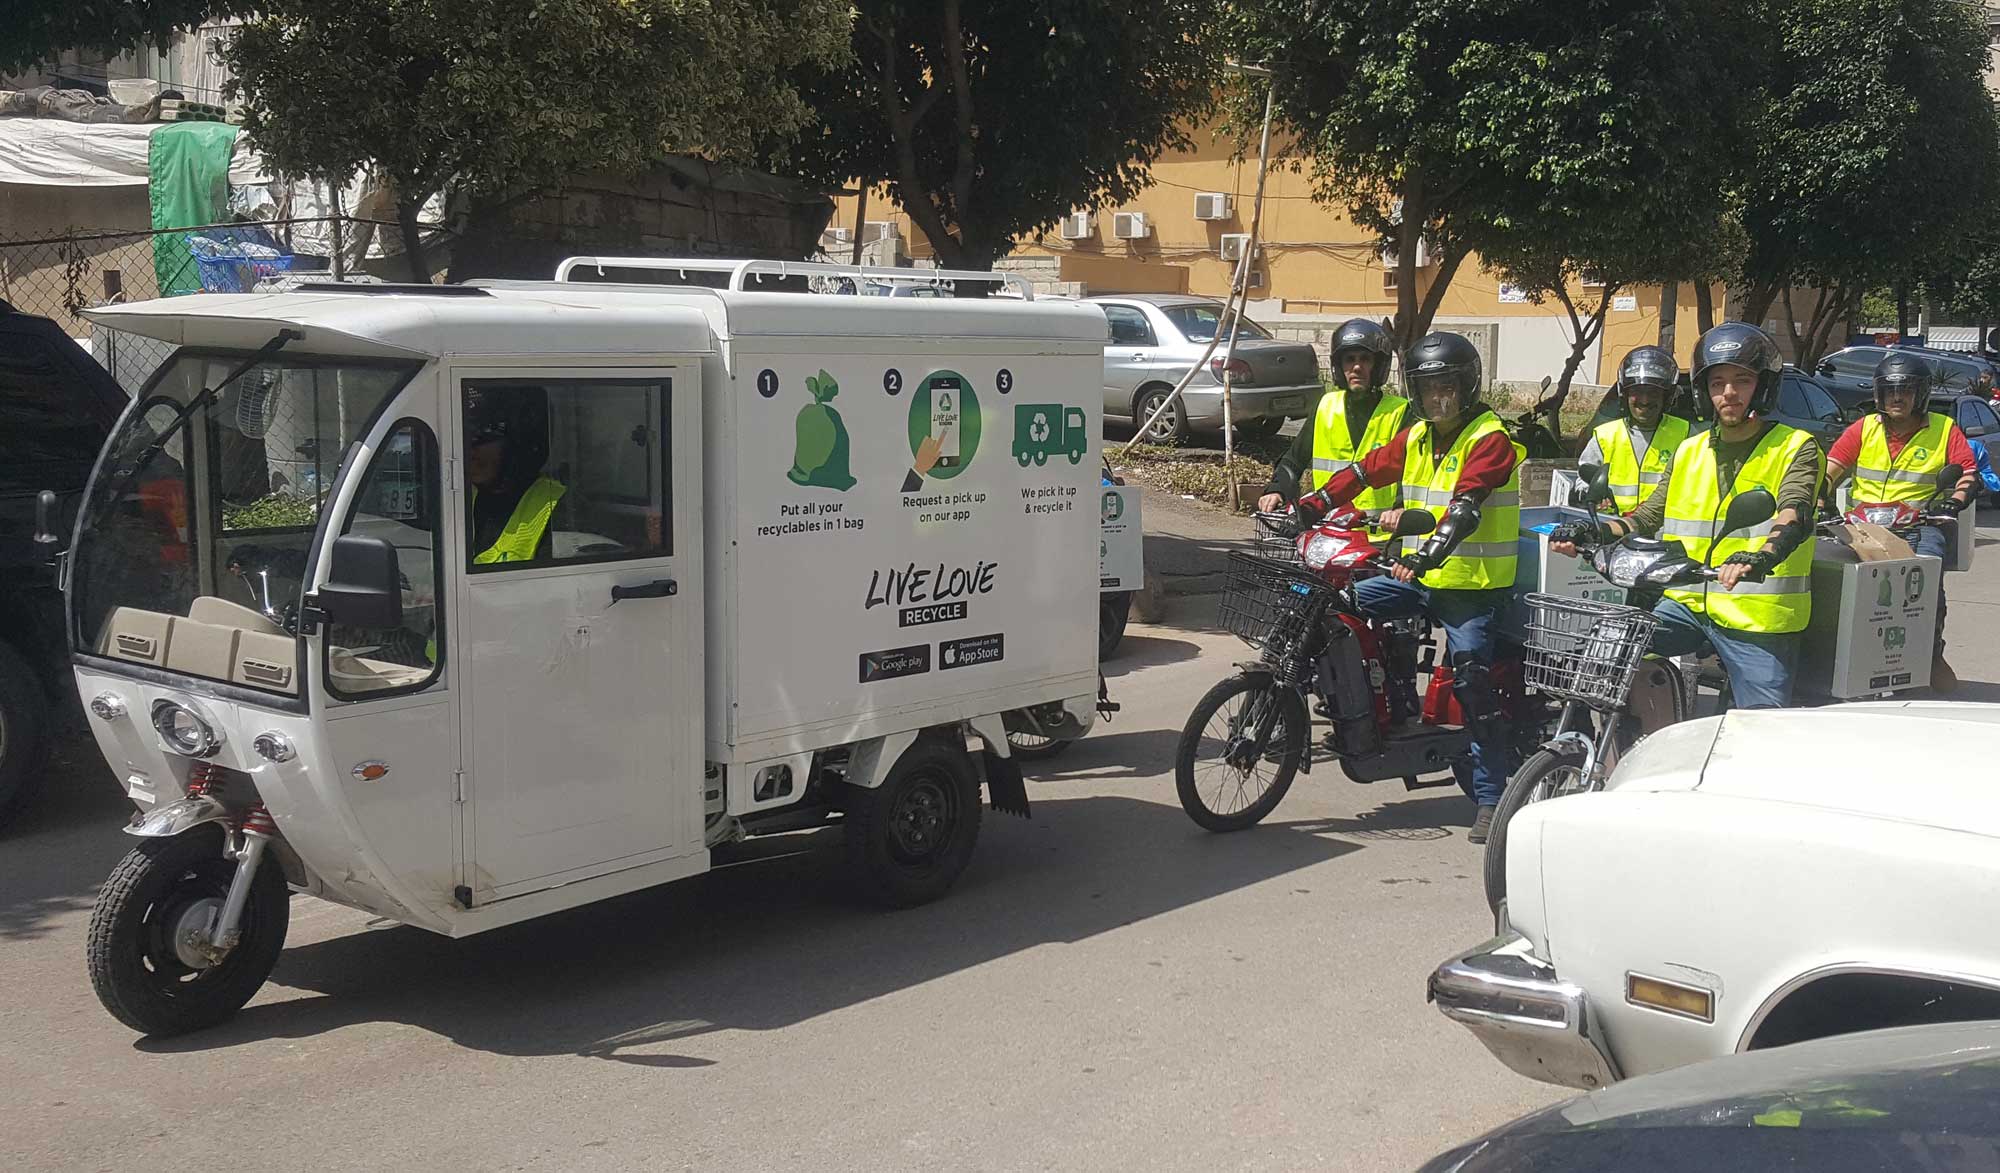 Live Love Recycle truck and drivers on the streets. (Lebanon Traveller)